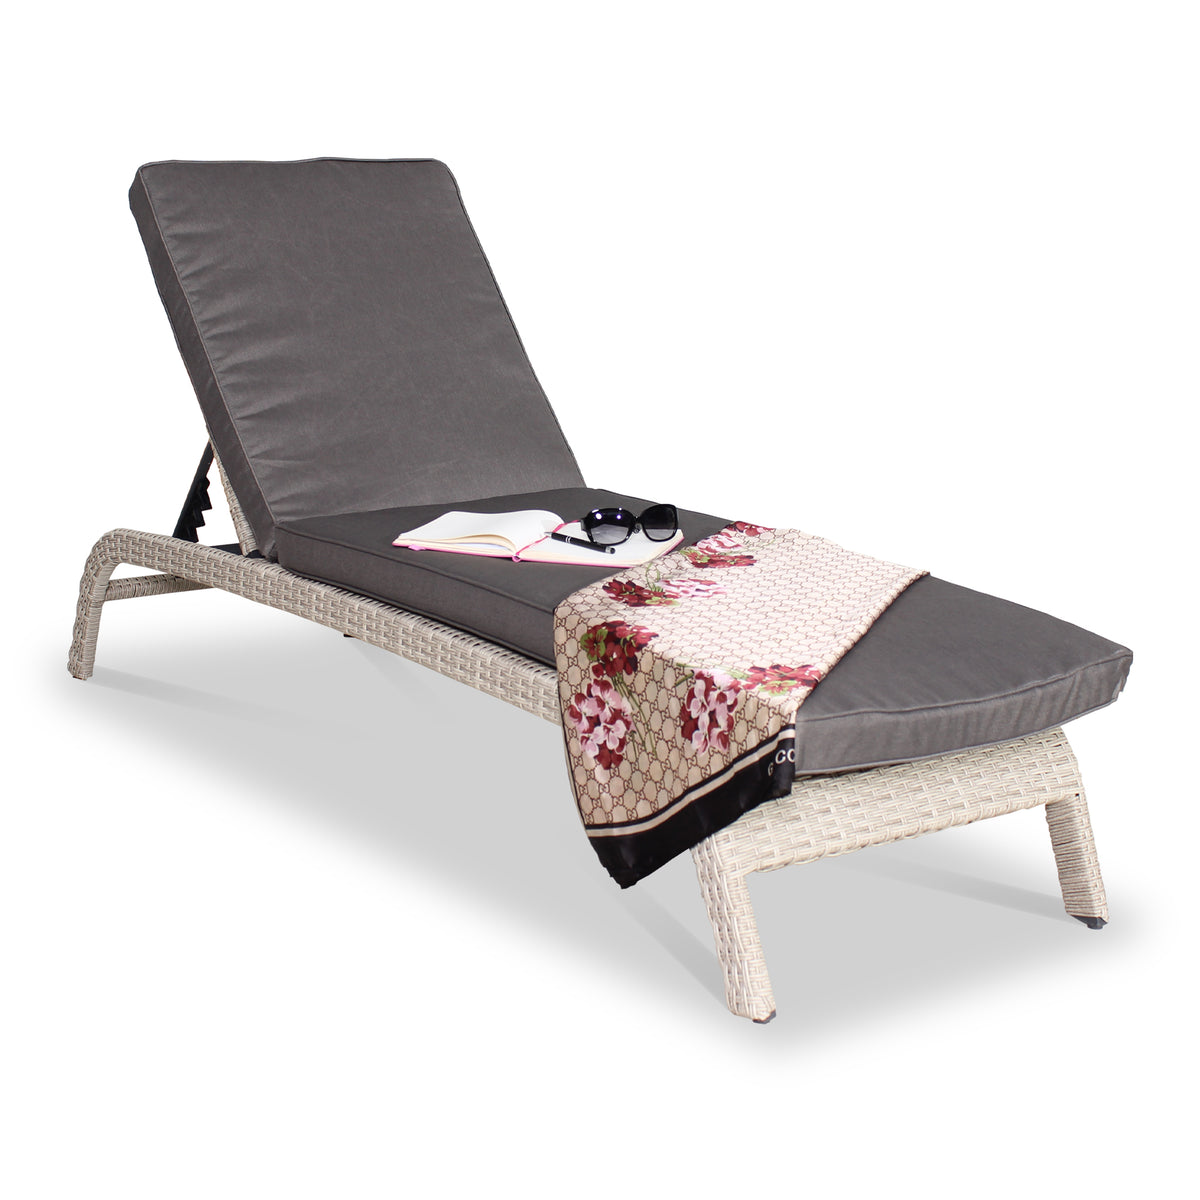 Lisbon Multi Position Arched Sunlounger from Roseland Furniture